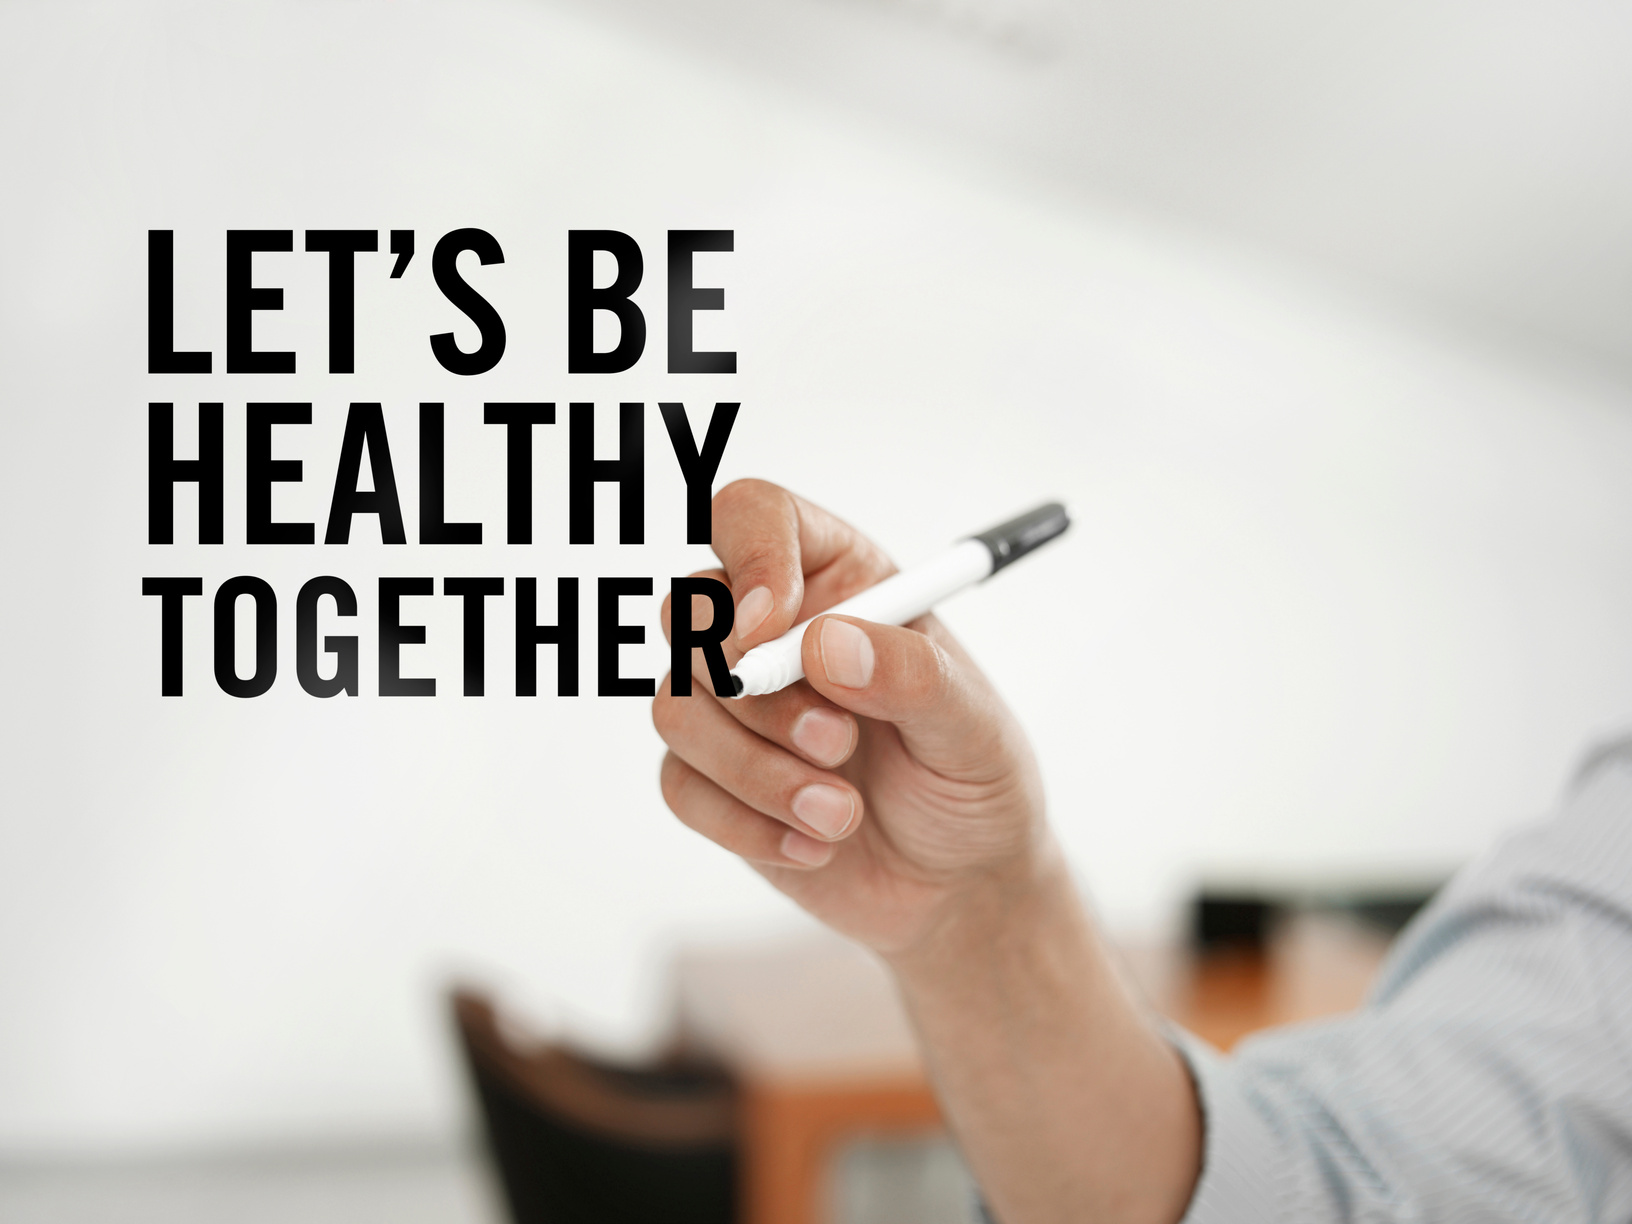 Let's be healthier together